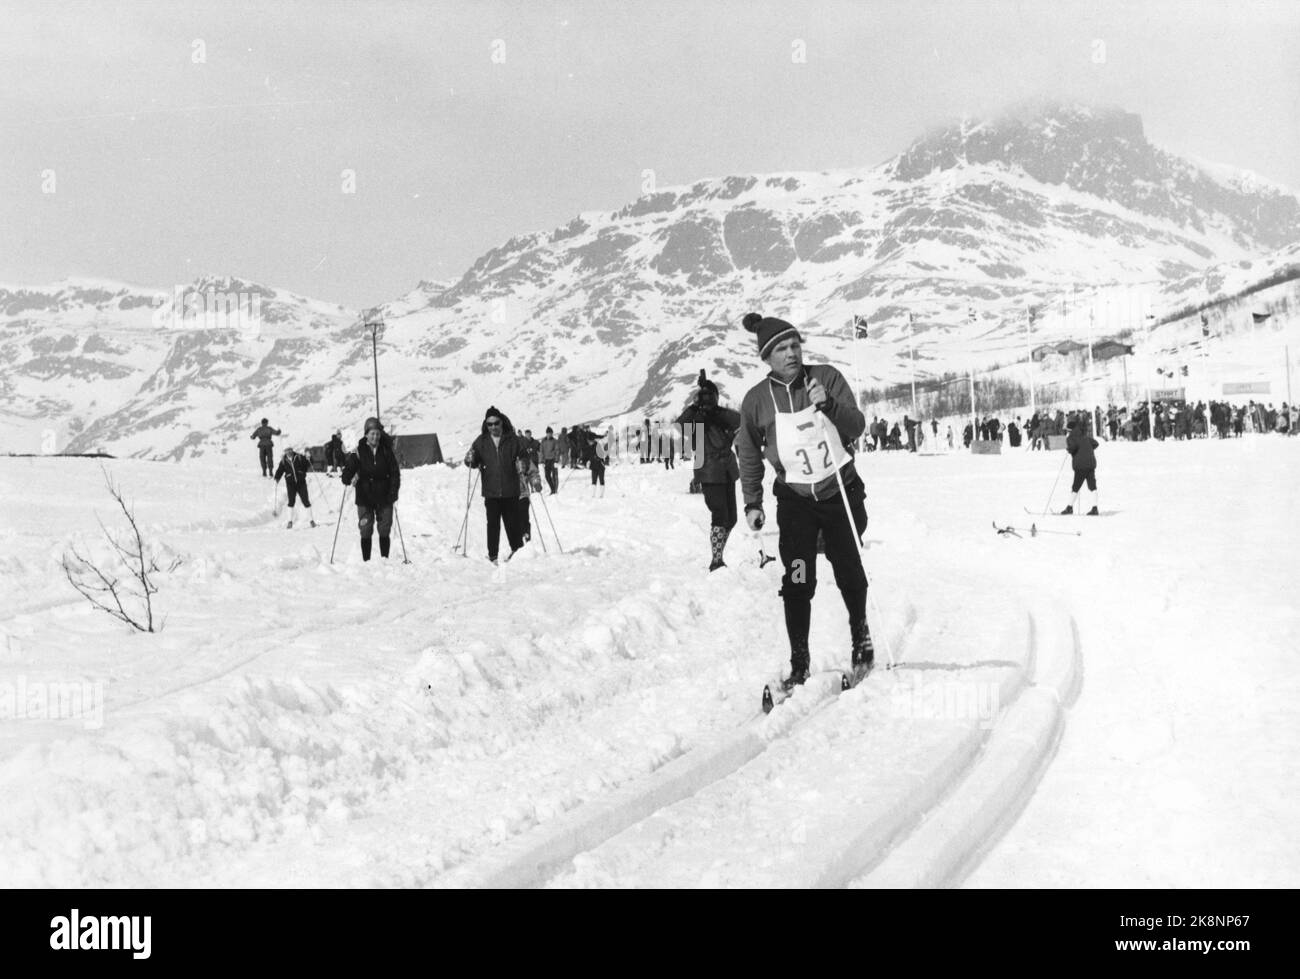 Beitostølen 1971 Abebe Bikila from Ethiopia, twice Olympic champion in the marathon, visits Beitostølen after an invitation from Erling Stordahl. Erling Stordahl in the ski slope. Bitihorn in the background Photo: Ivar Aaserud / Current / NTB Stock Photo